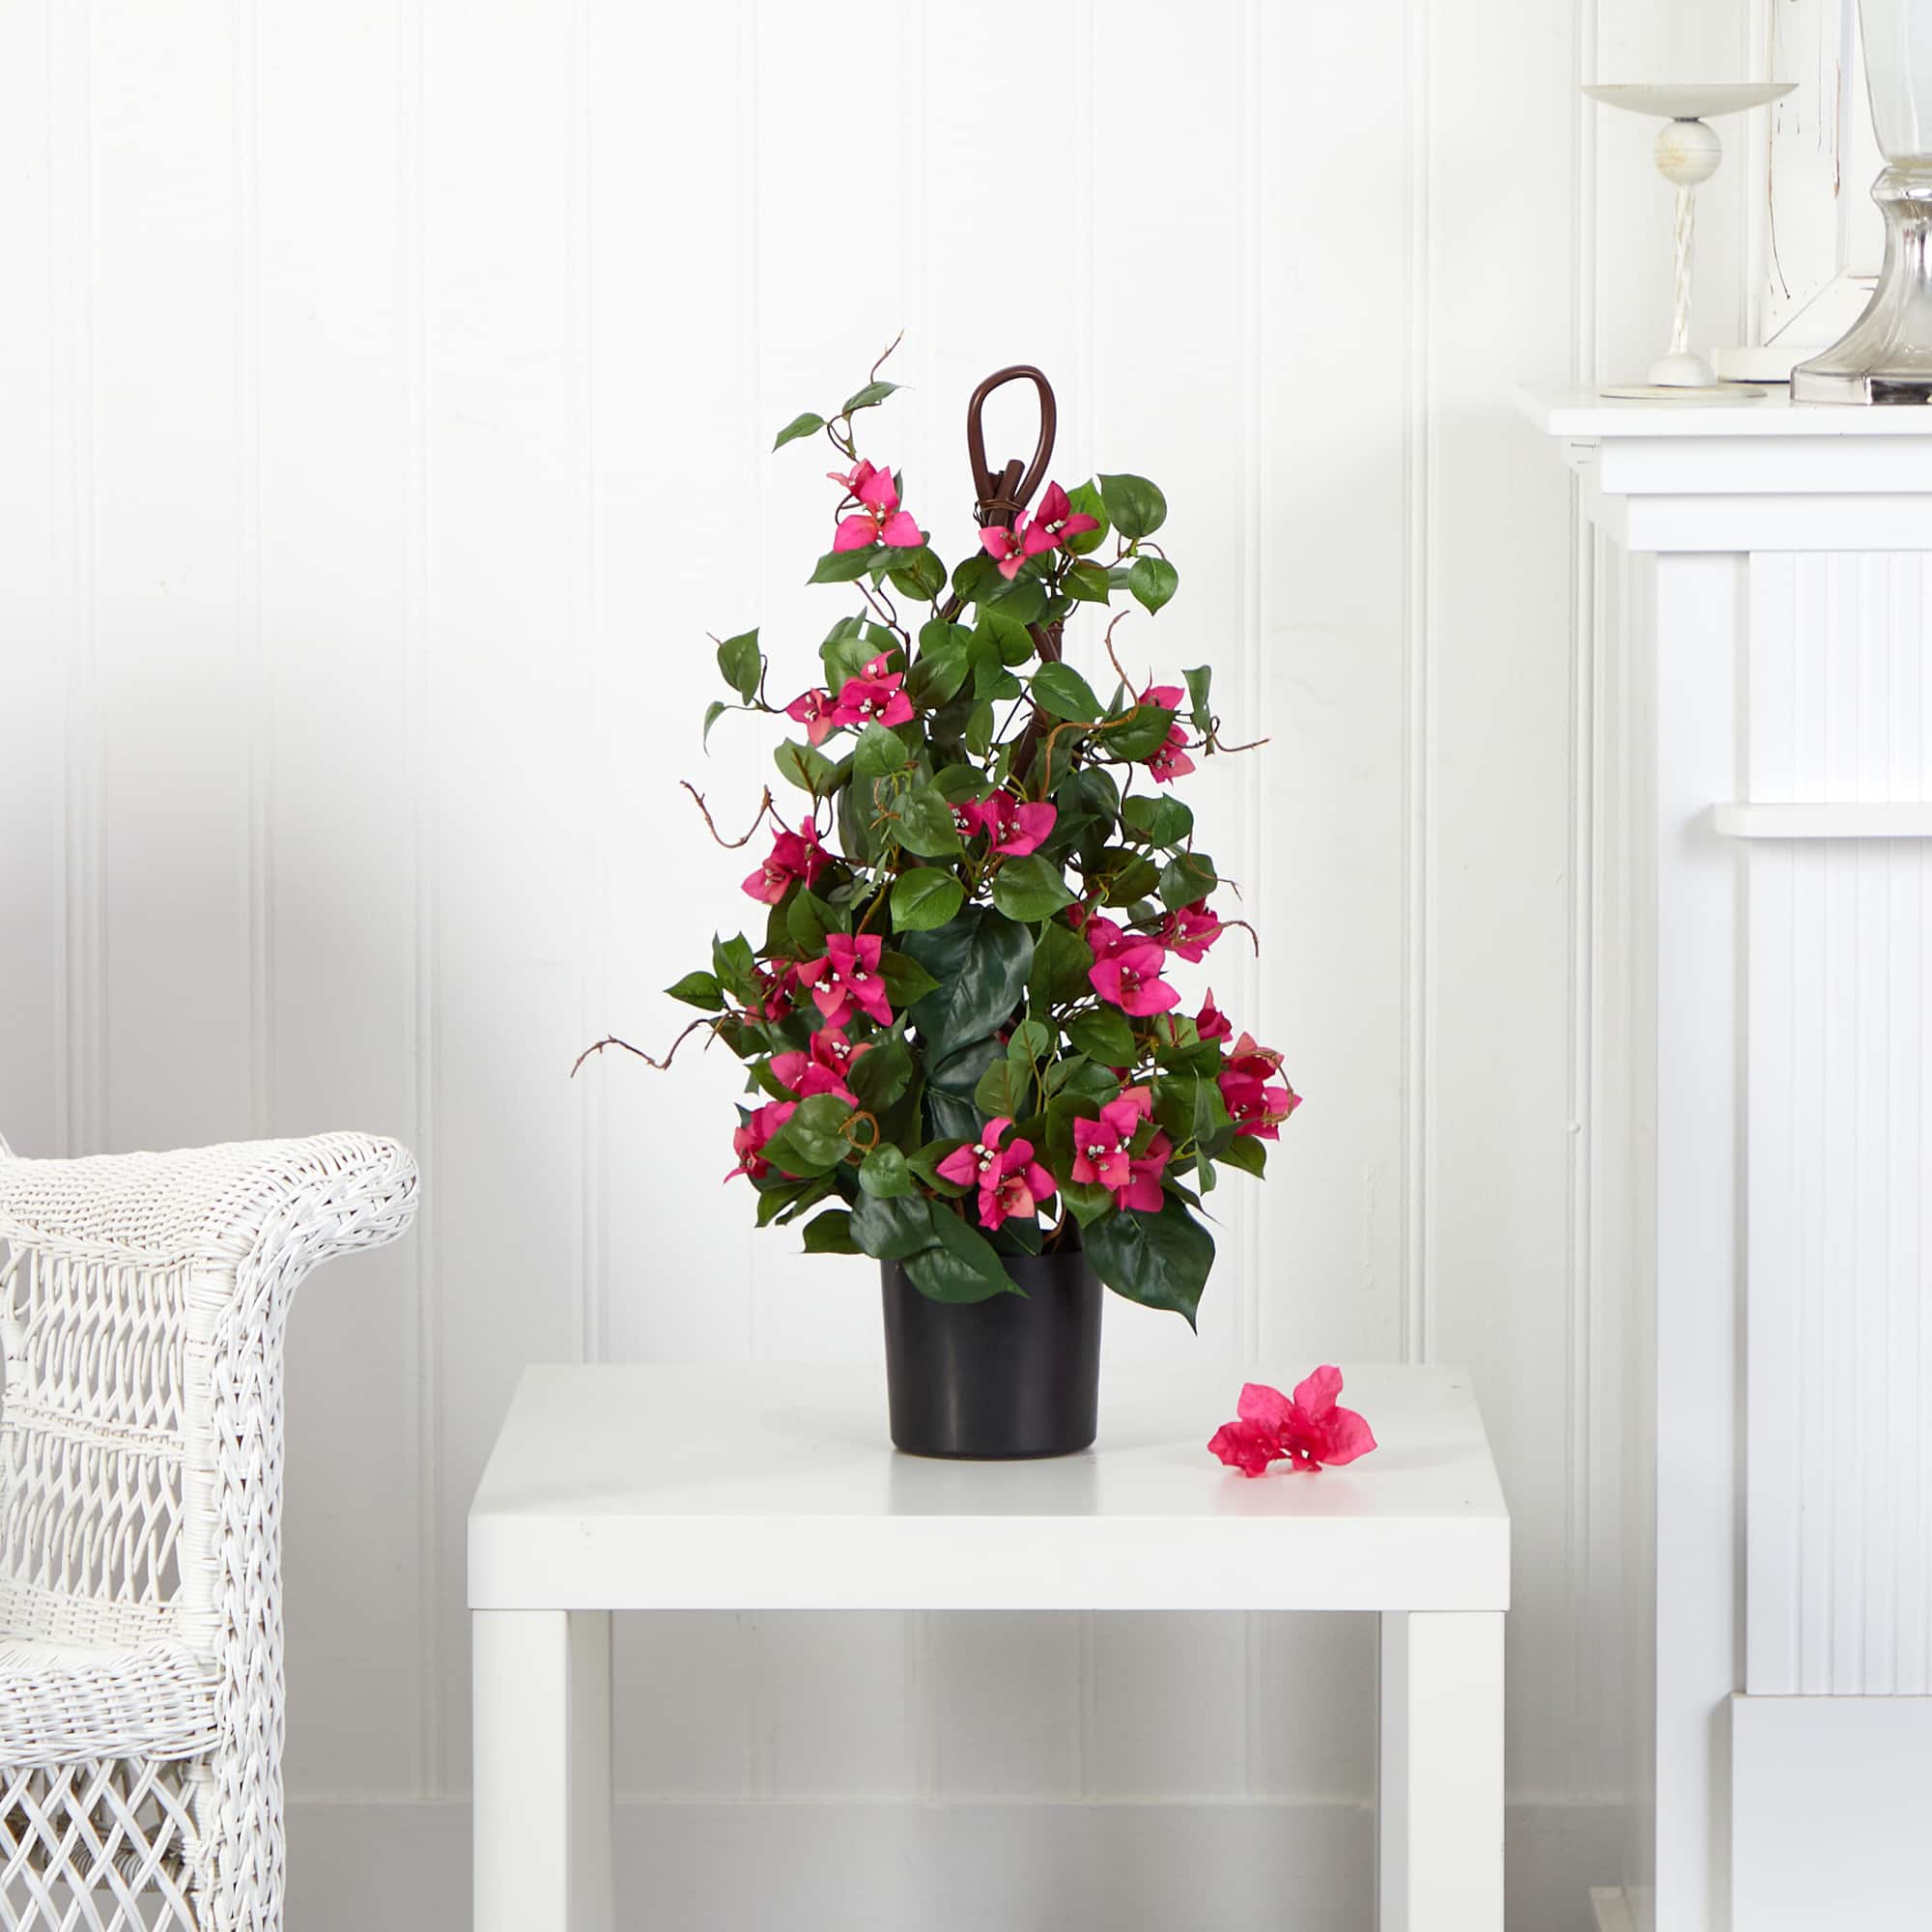 2ft. Potted Bougainvillea Climbing Plant